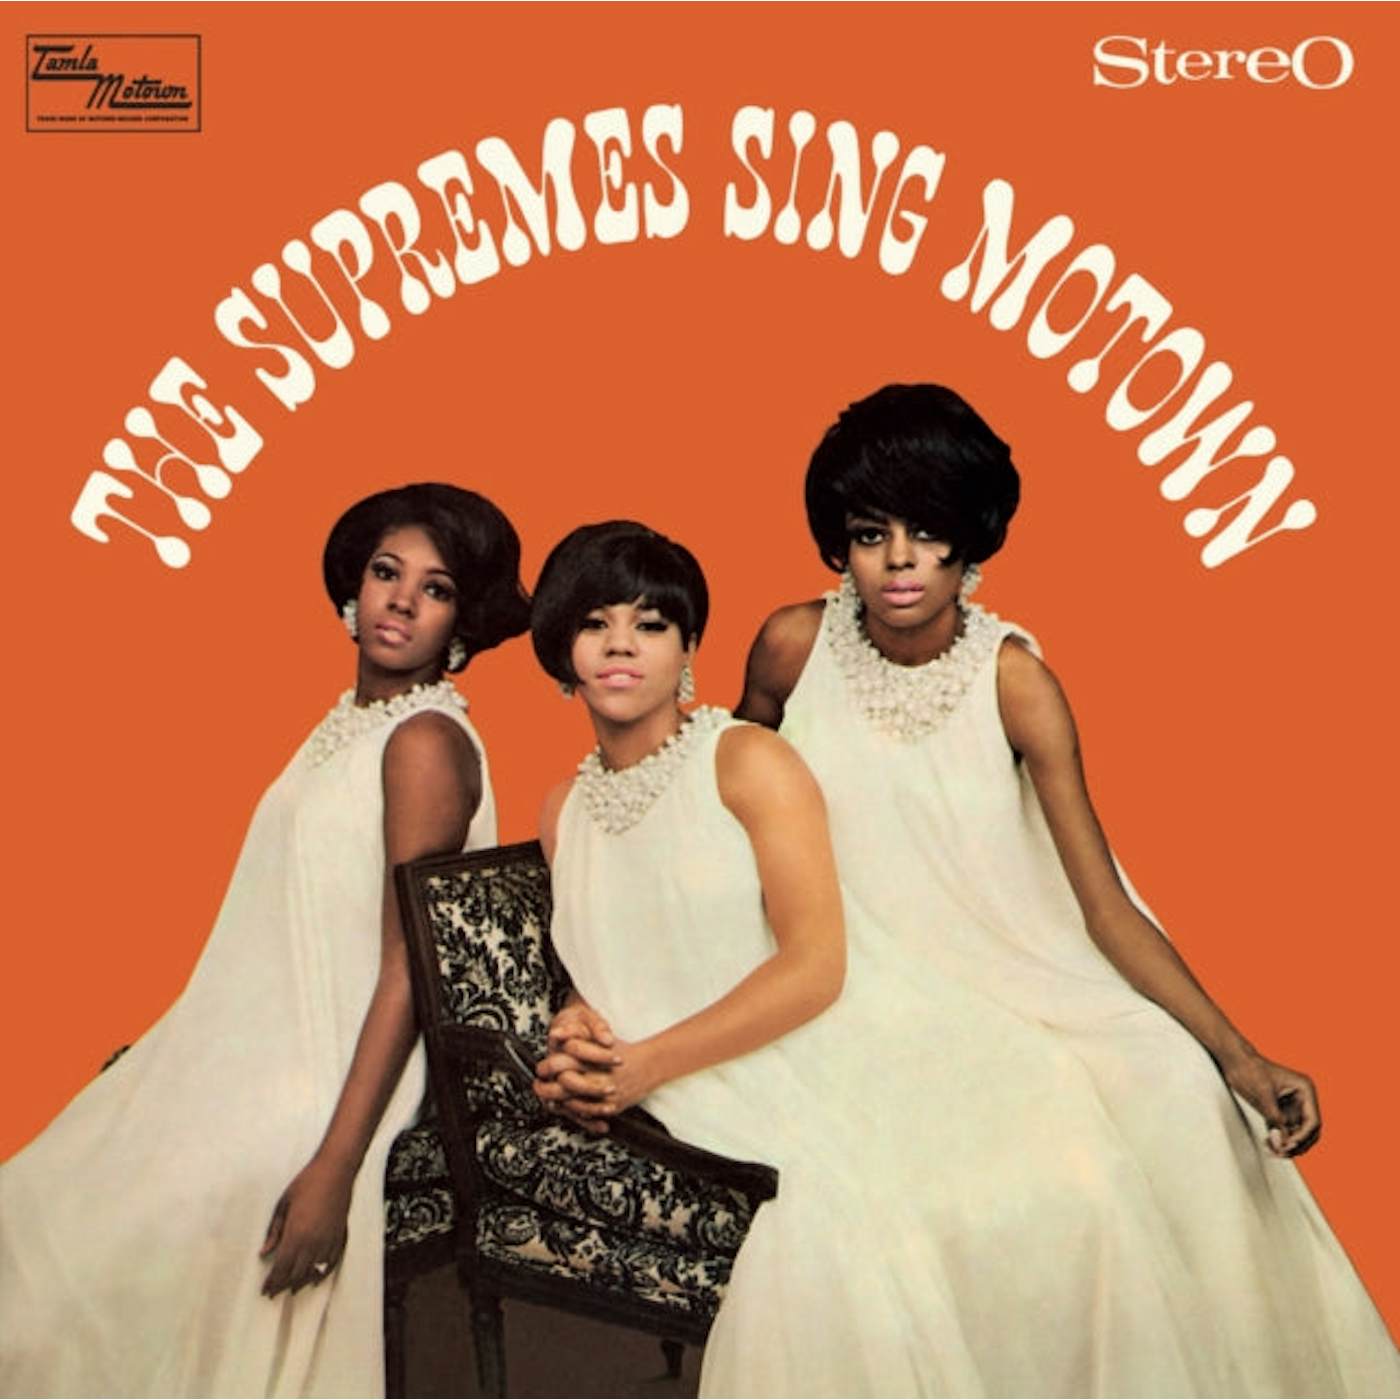 Supremes LP Vinyl Record - The Supremes Sing Motown (Limited Edition)